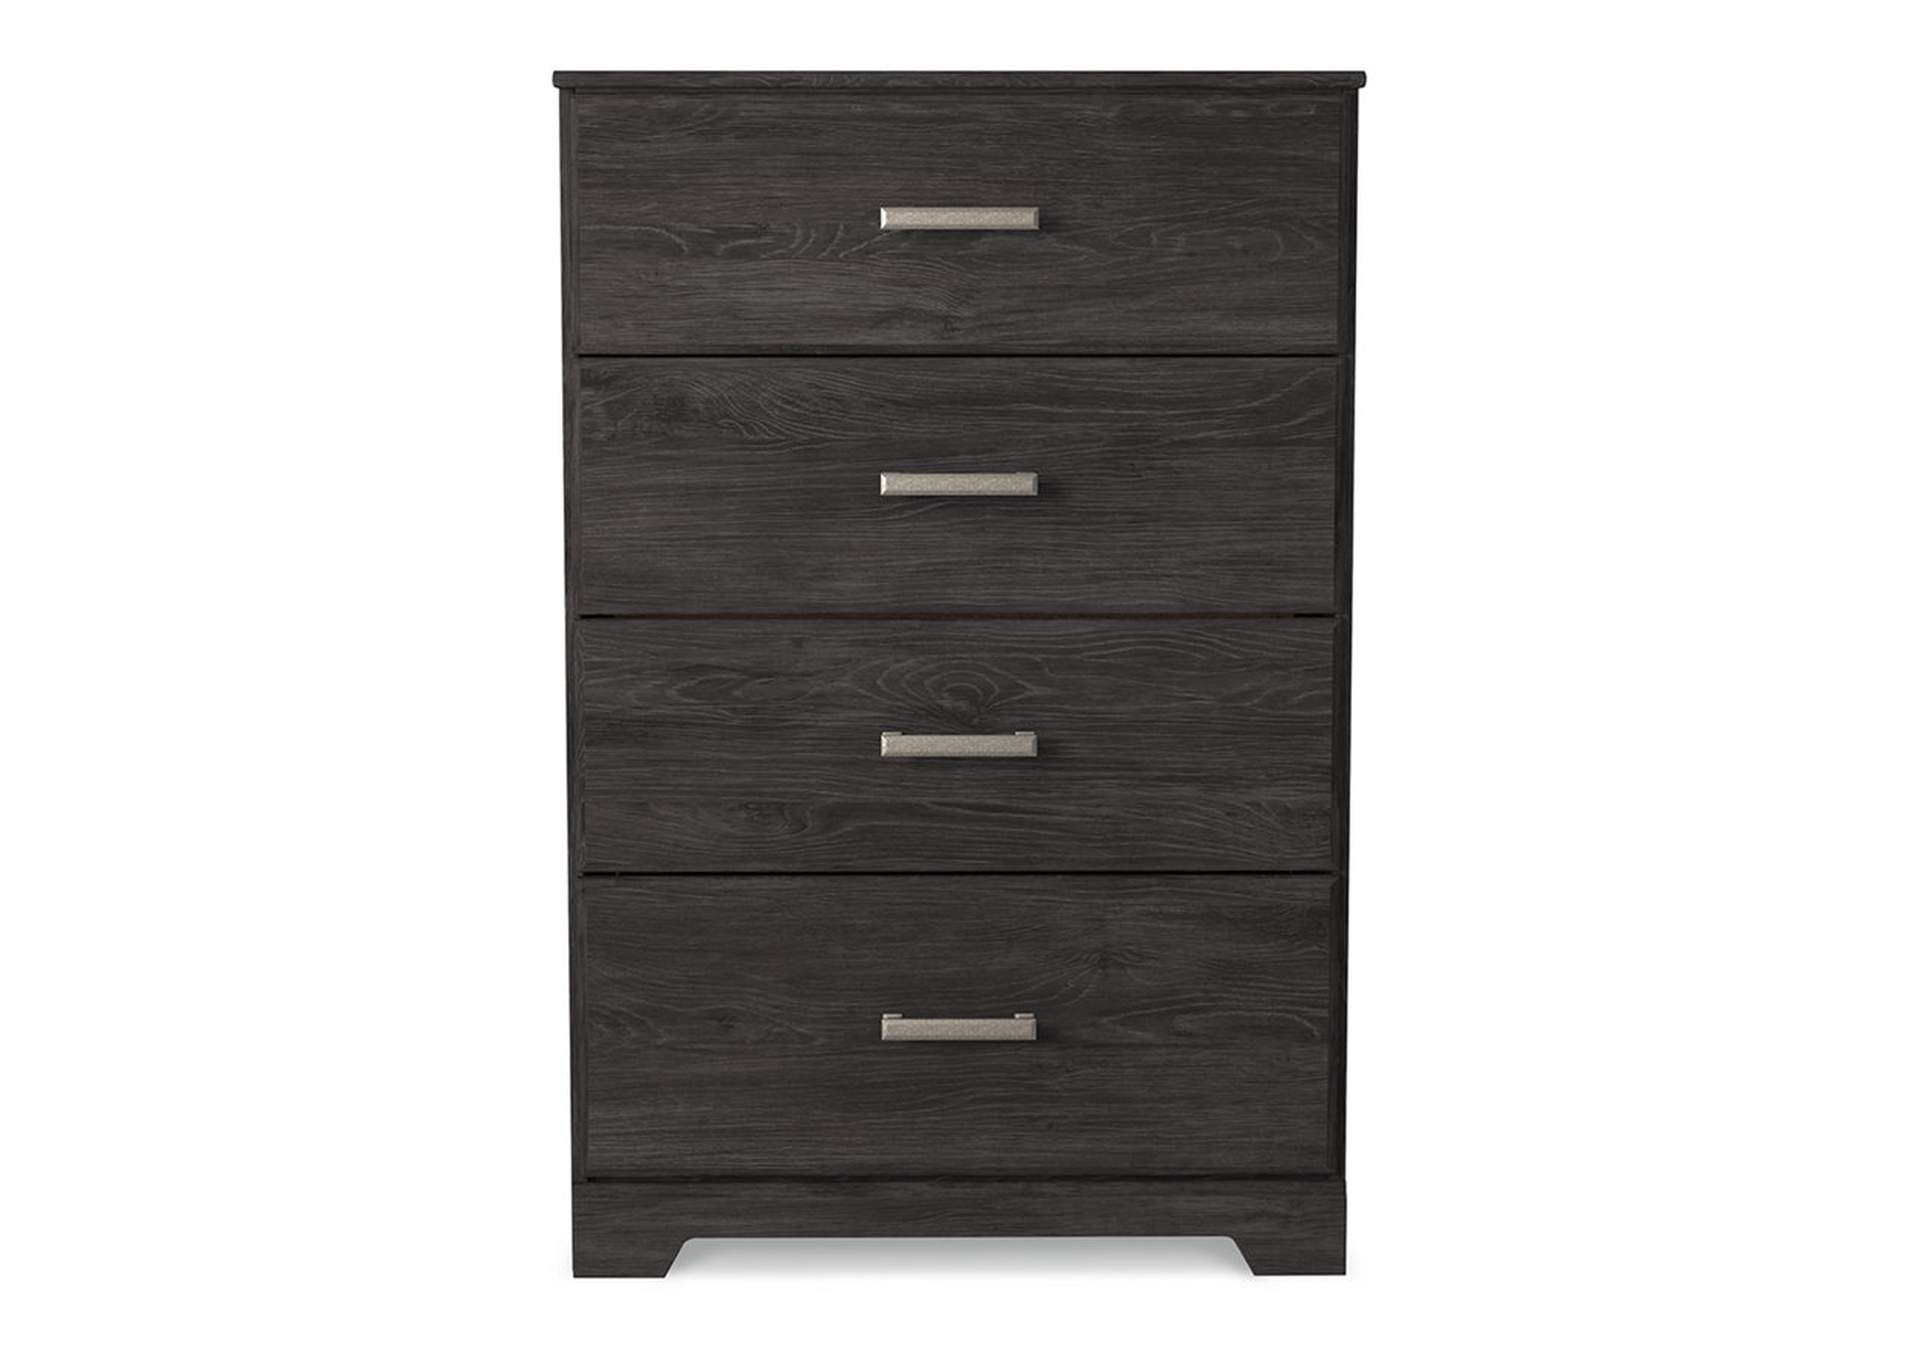 Belachime Chest of Drawers,Signature Design By Ashley